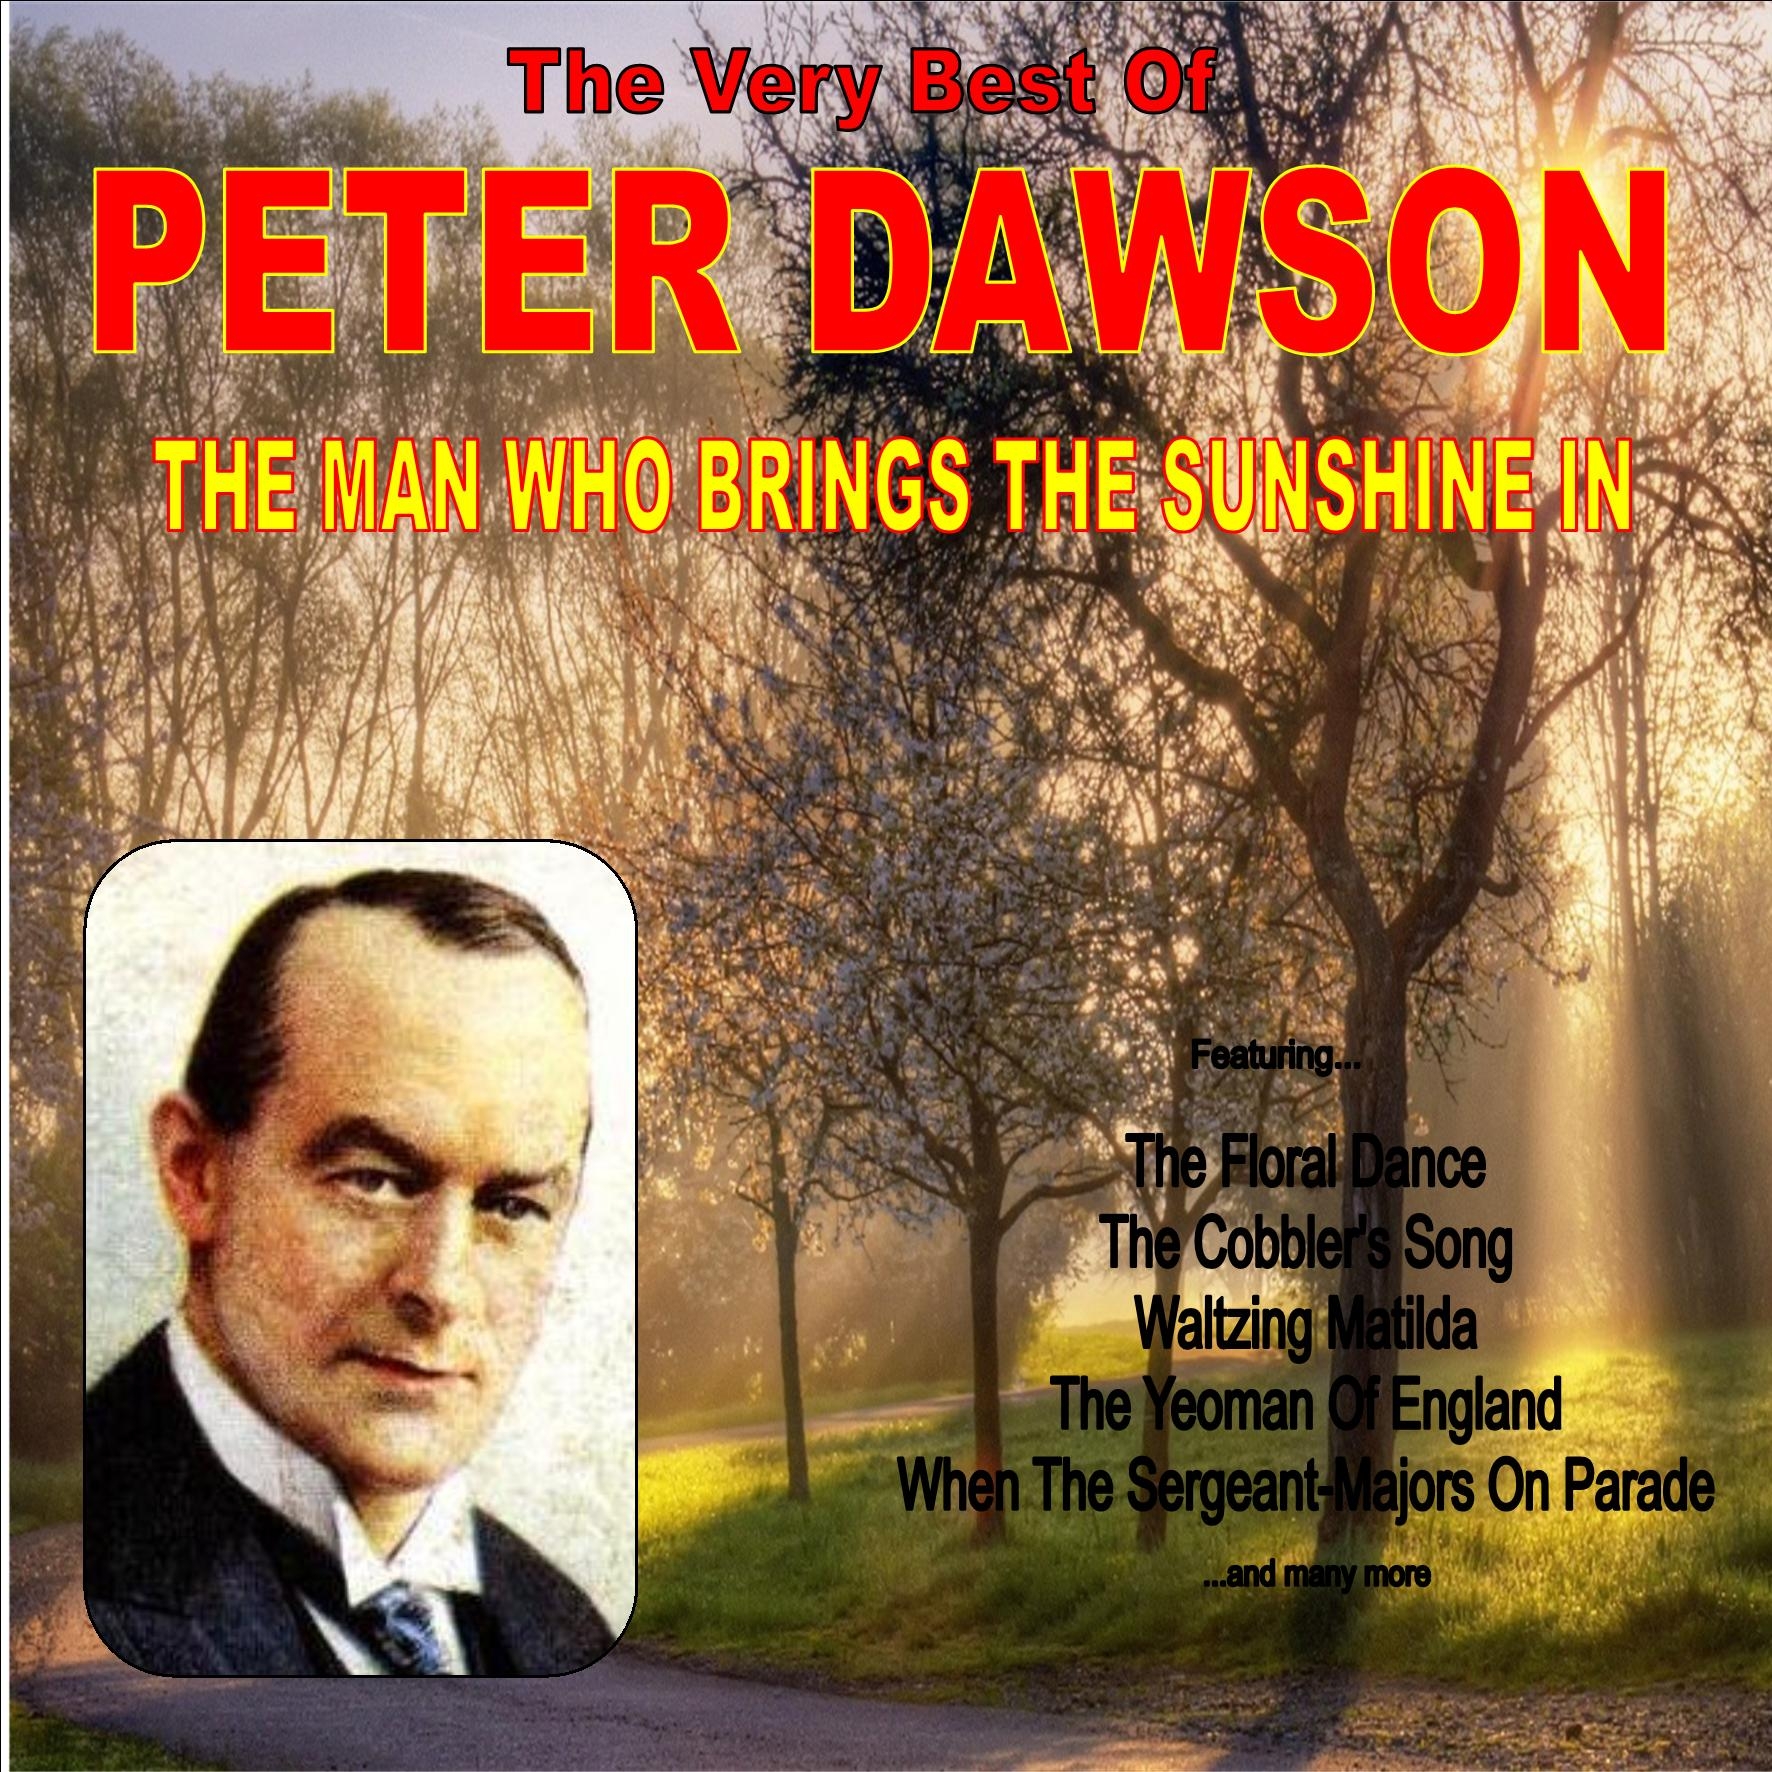 The Man Who Brings the Sunshine: The Very Best of Peter Dawson